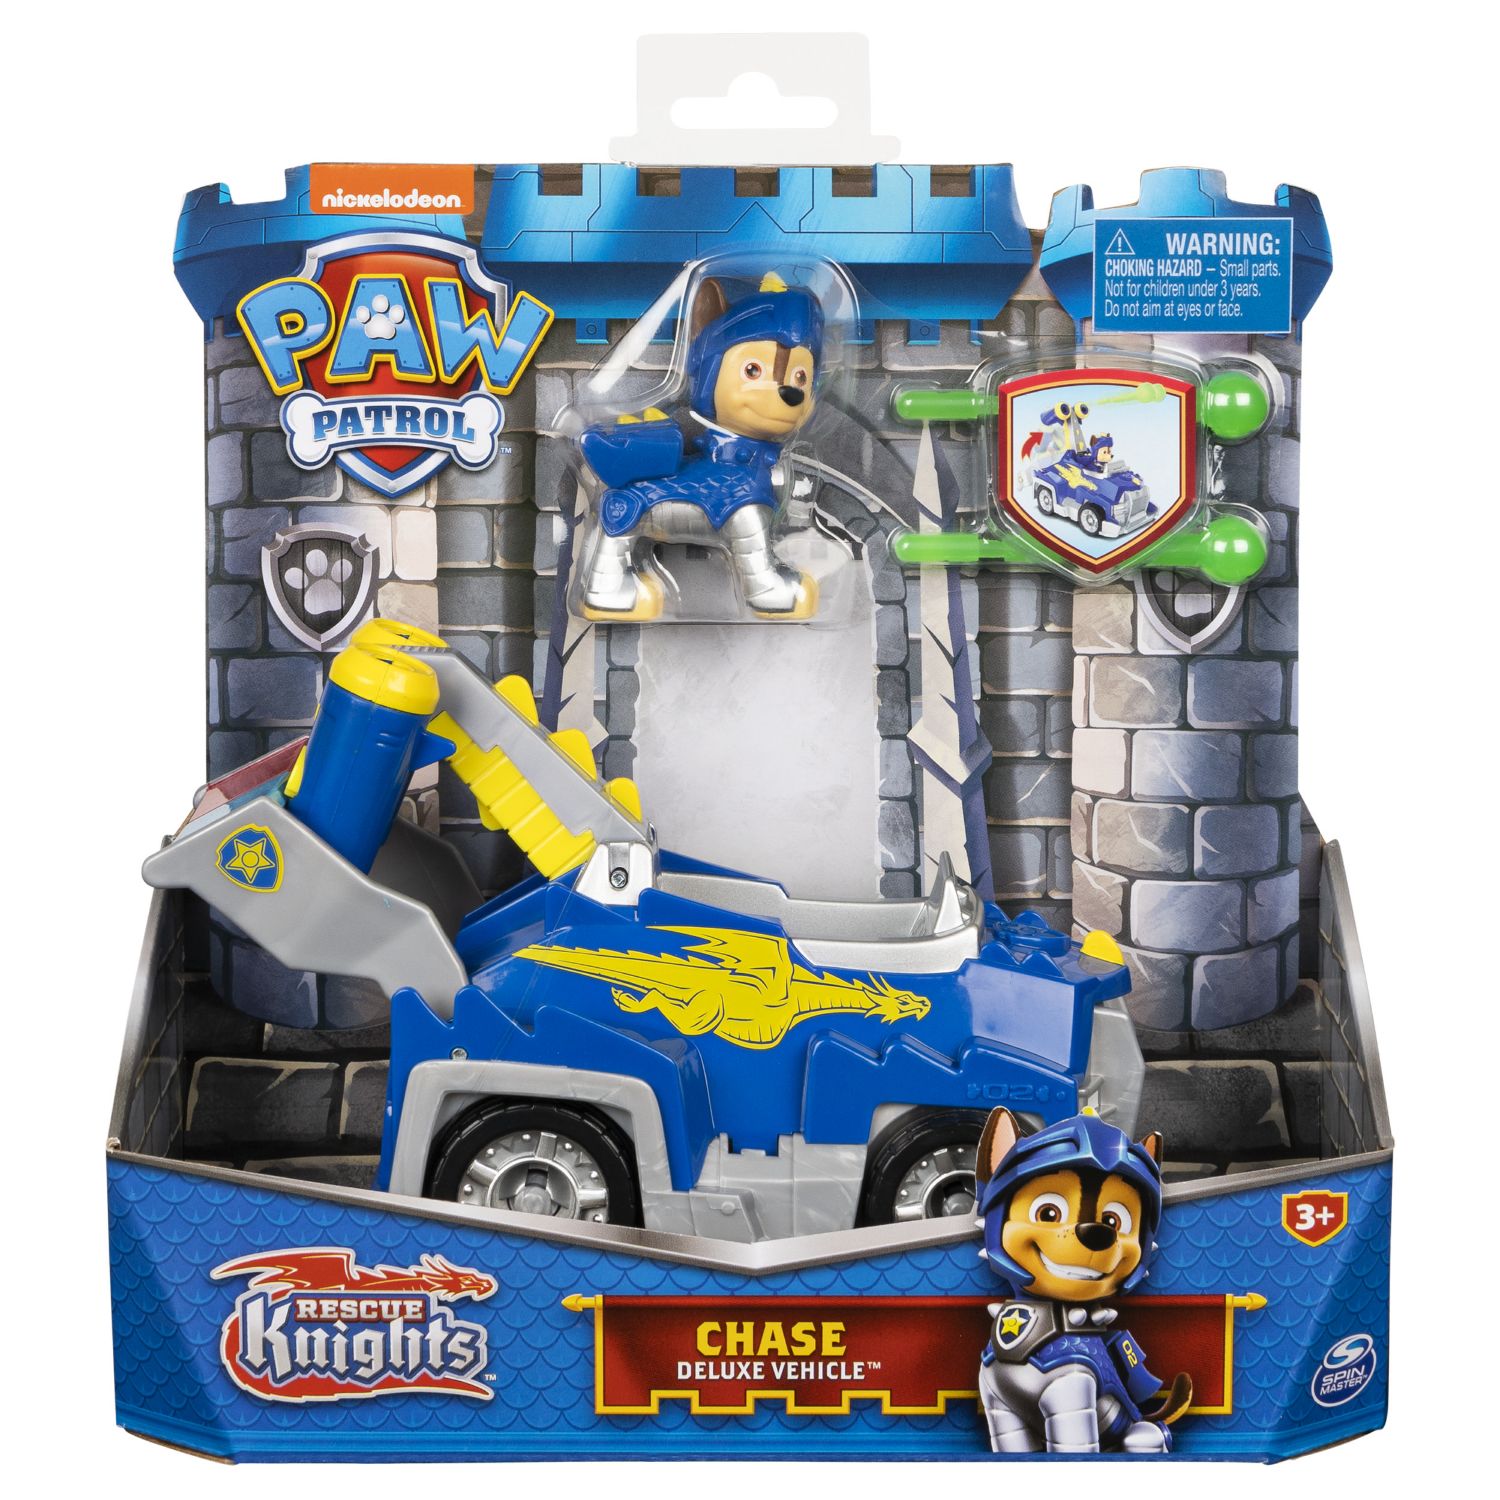 PAW PATROL RESCUE KNIGHTS DELUXE VEHICLE ASSORTI